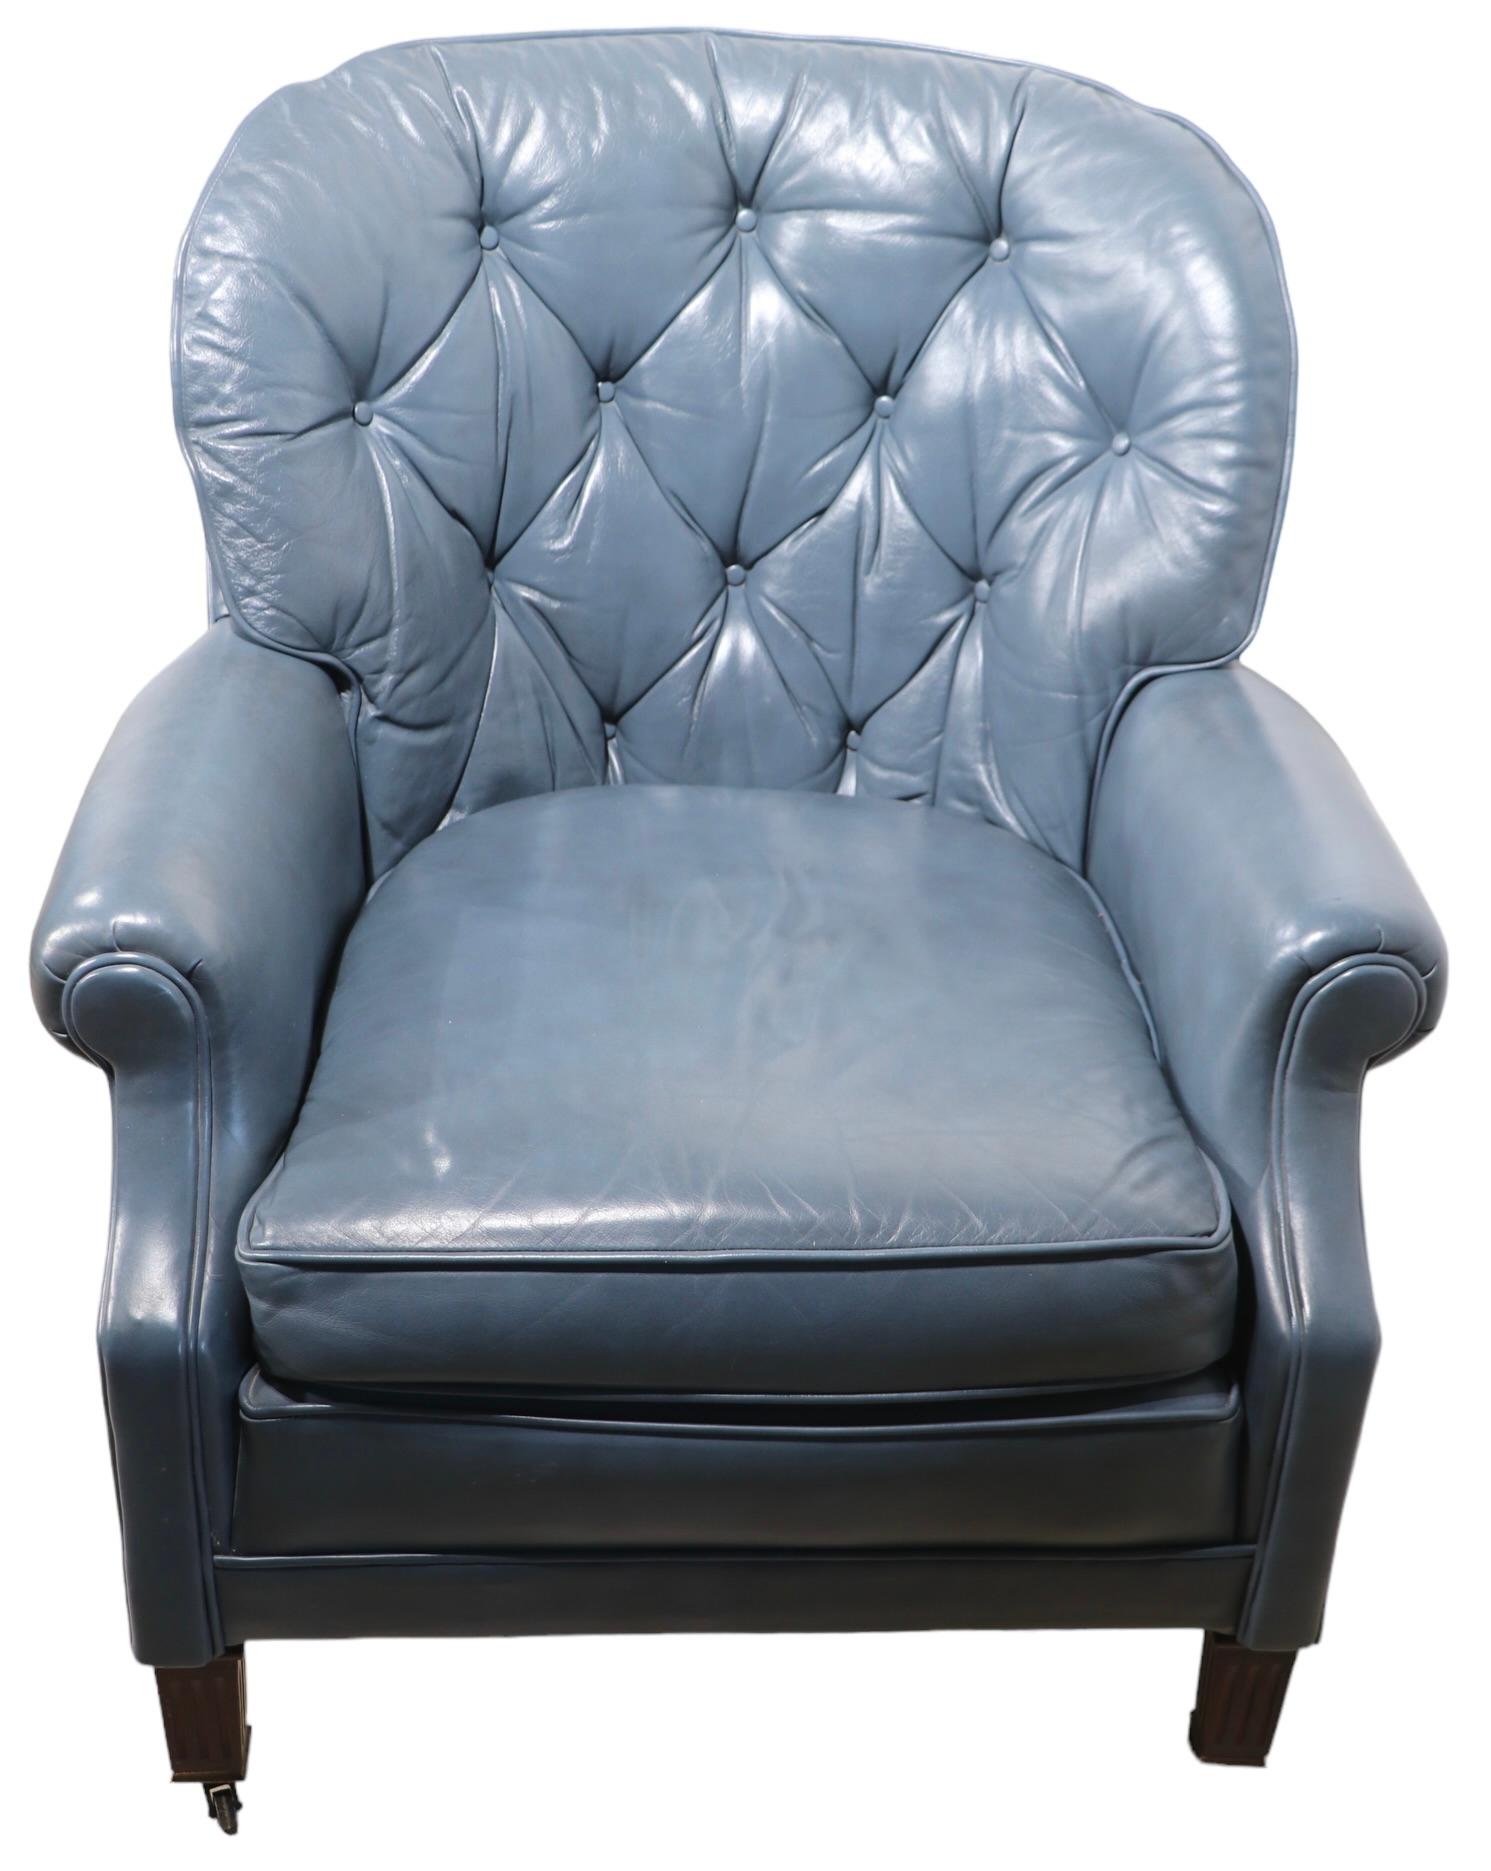 Lounge Chair and Ottoman in  Blue Leather  by Classic  9